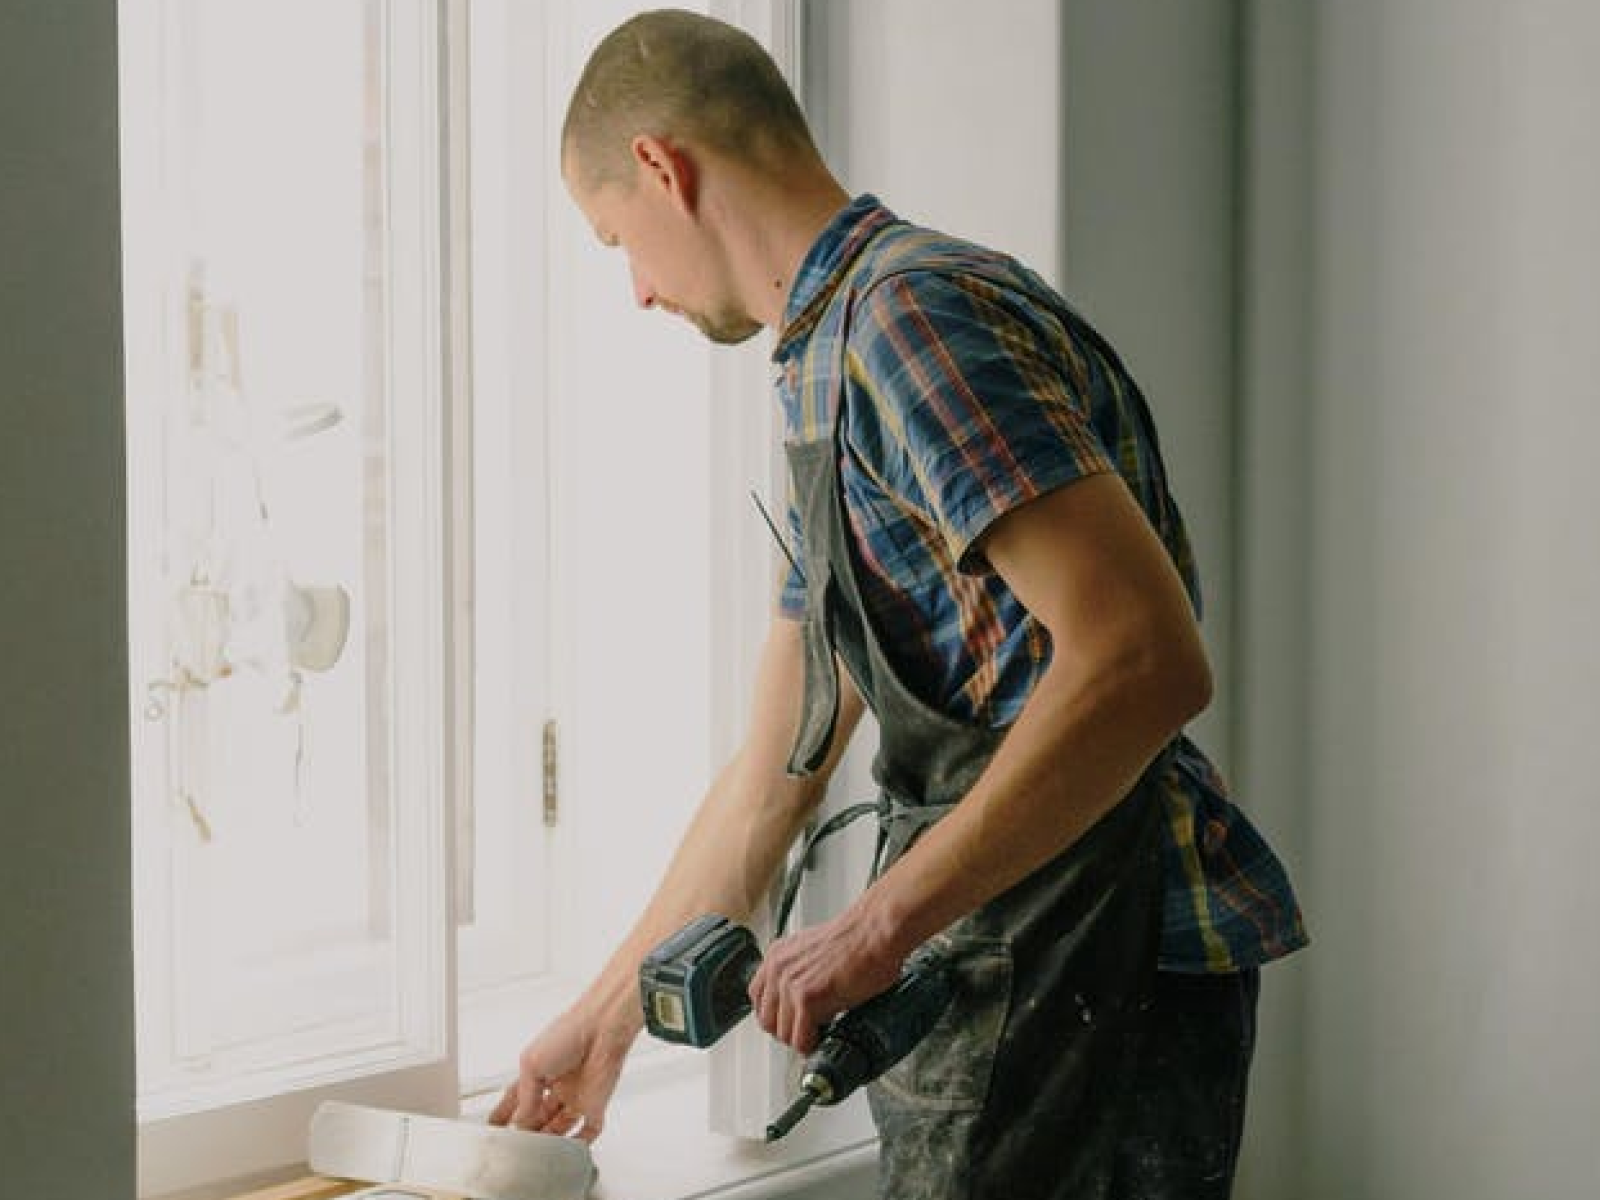 Image of a property owner renovating their home before renting.